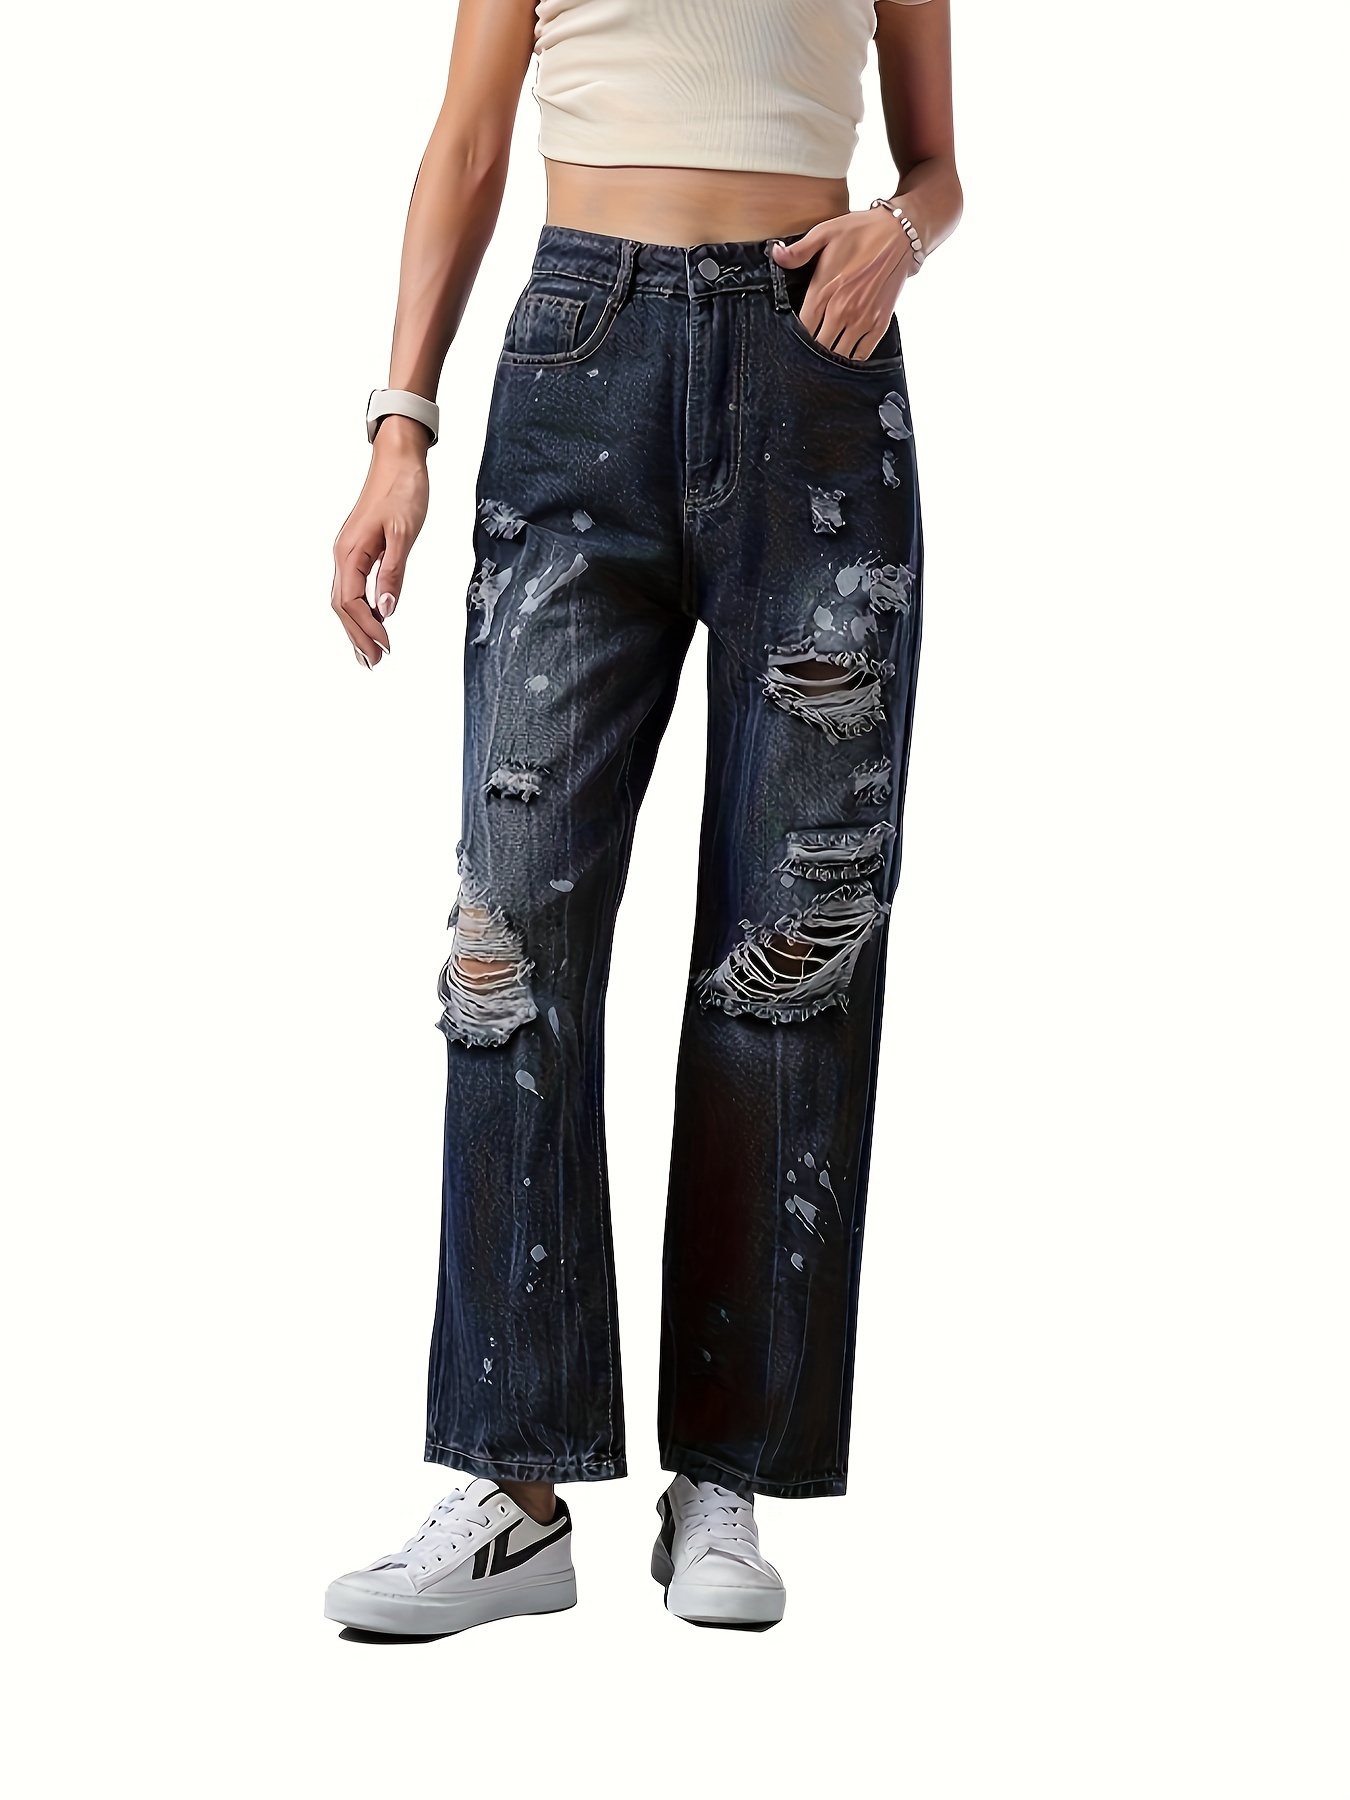 Ripped Holes Chic Straight Jeans, Loose Fit Non-Stretch Slant Pockets Denim  Pants, Women's Denim Jeans & Clothing